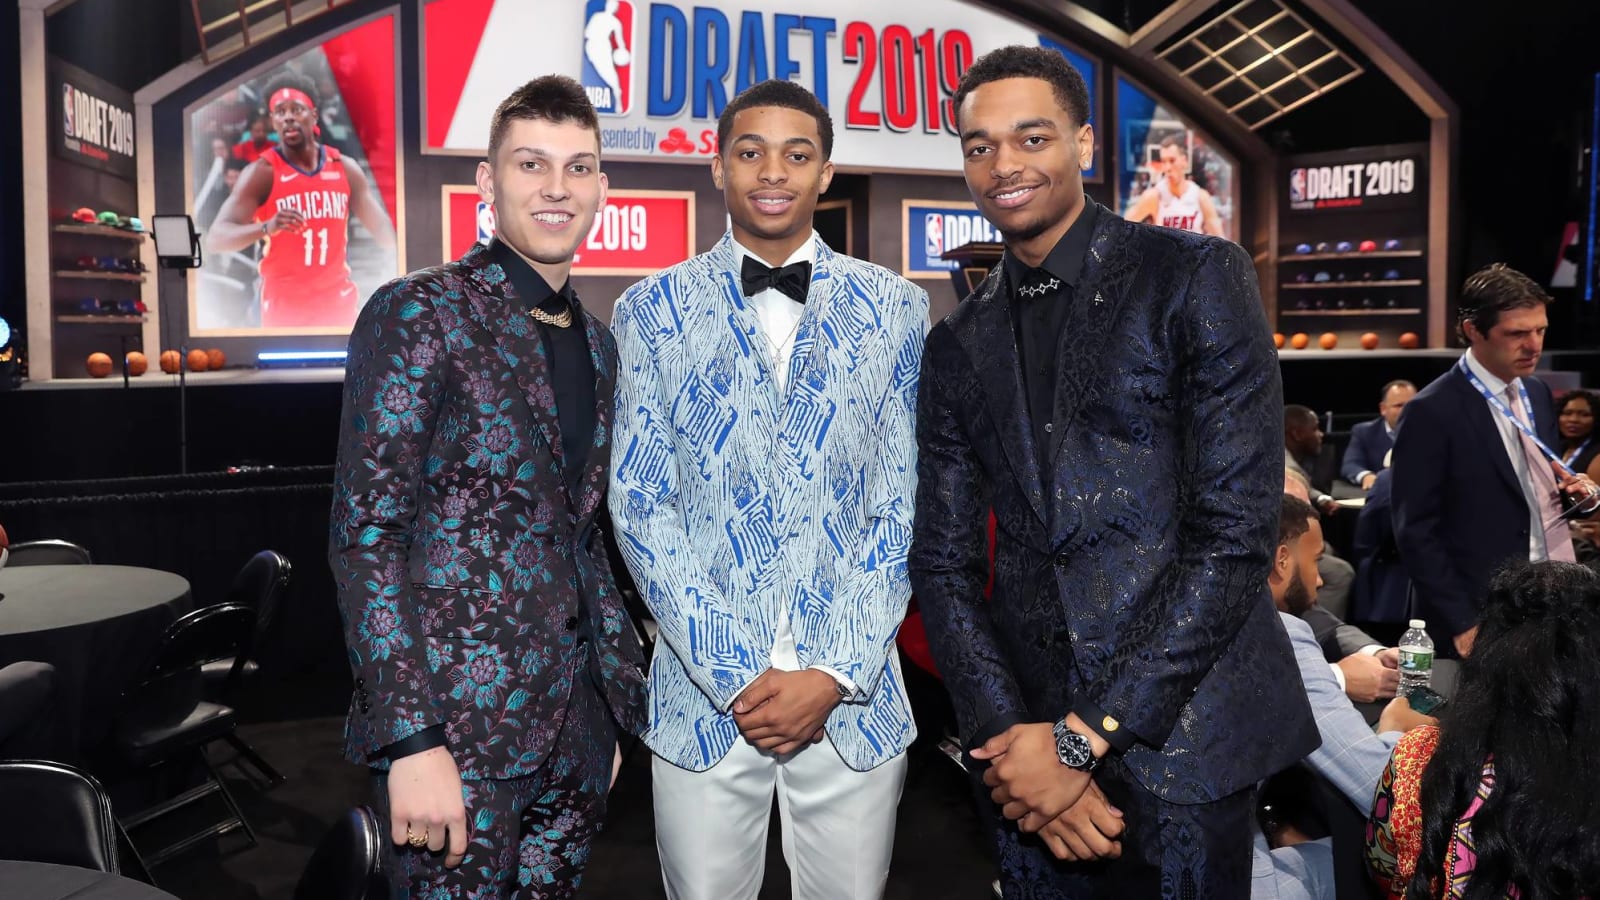 Grading The Best And Worst Suits From The 2023 NBA Draft